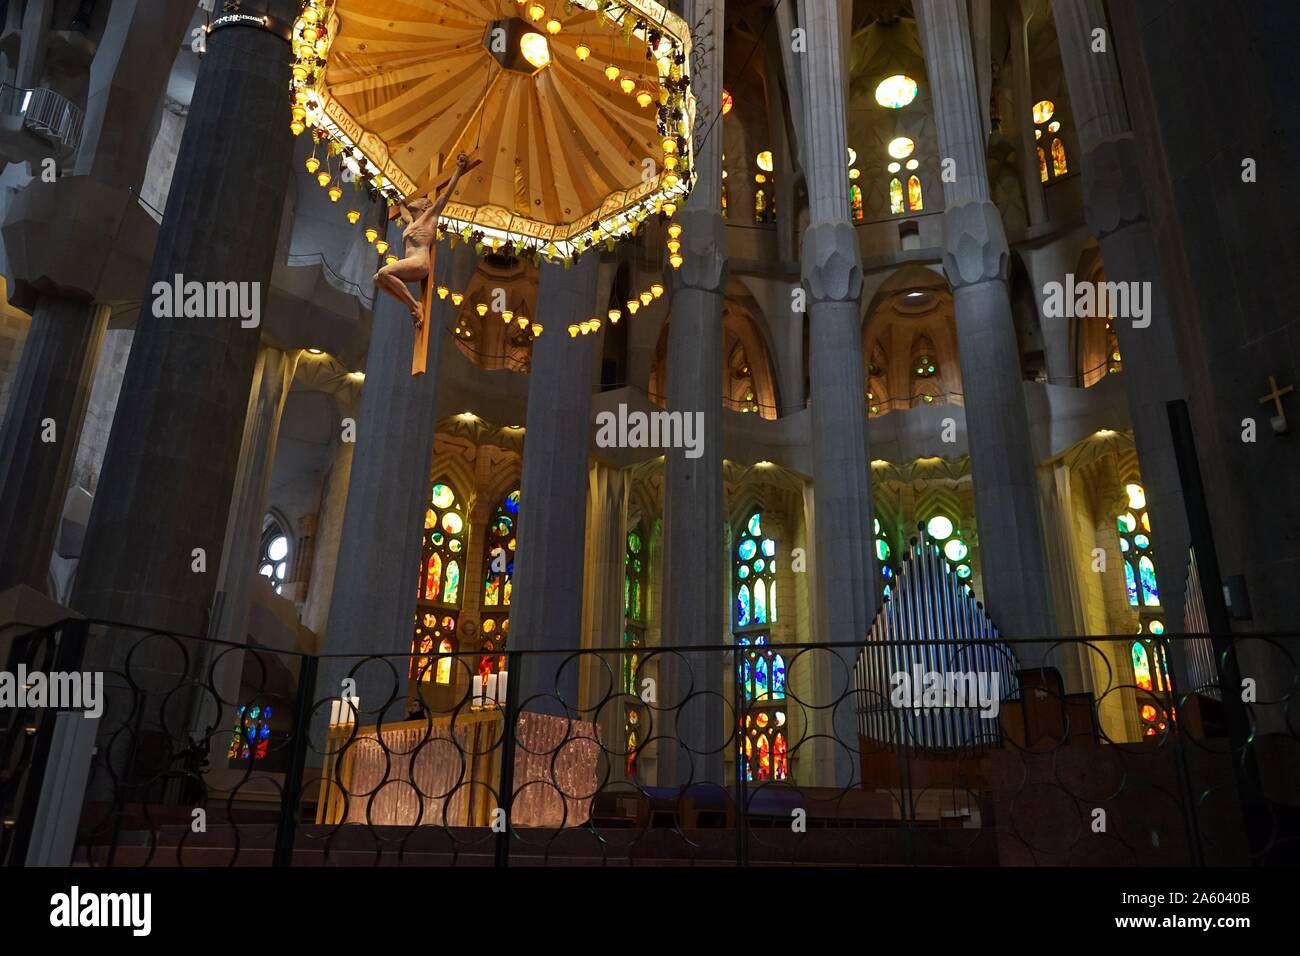 View of the suspended crucifix and glass altar within the Basílica i Temple Expiatori de la Sagrada Família, a Roman Catholic church in Barcelona, designed by Spanish architect Antoni Gaudí (1852–1926). Dated 21st Century Stock Photo